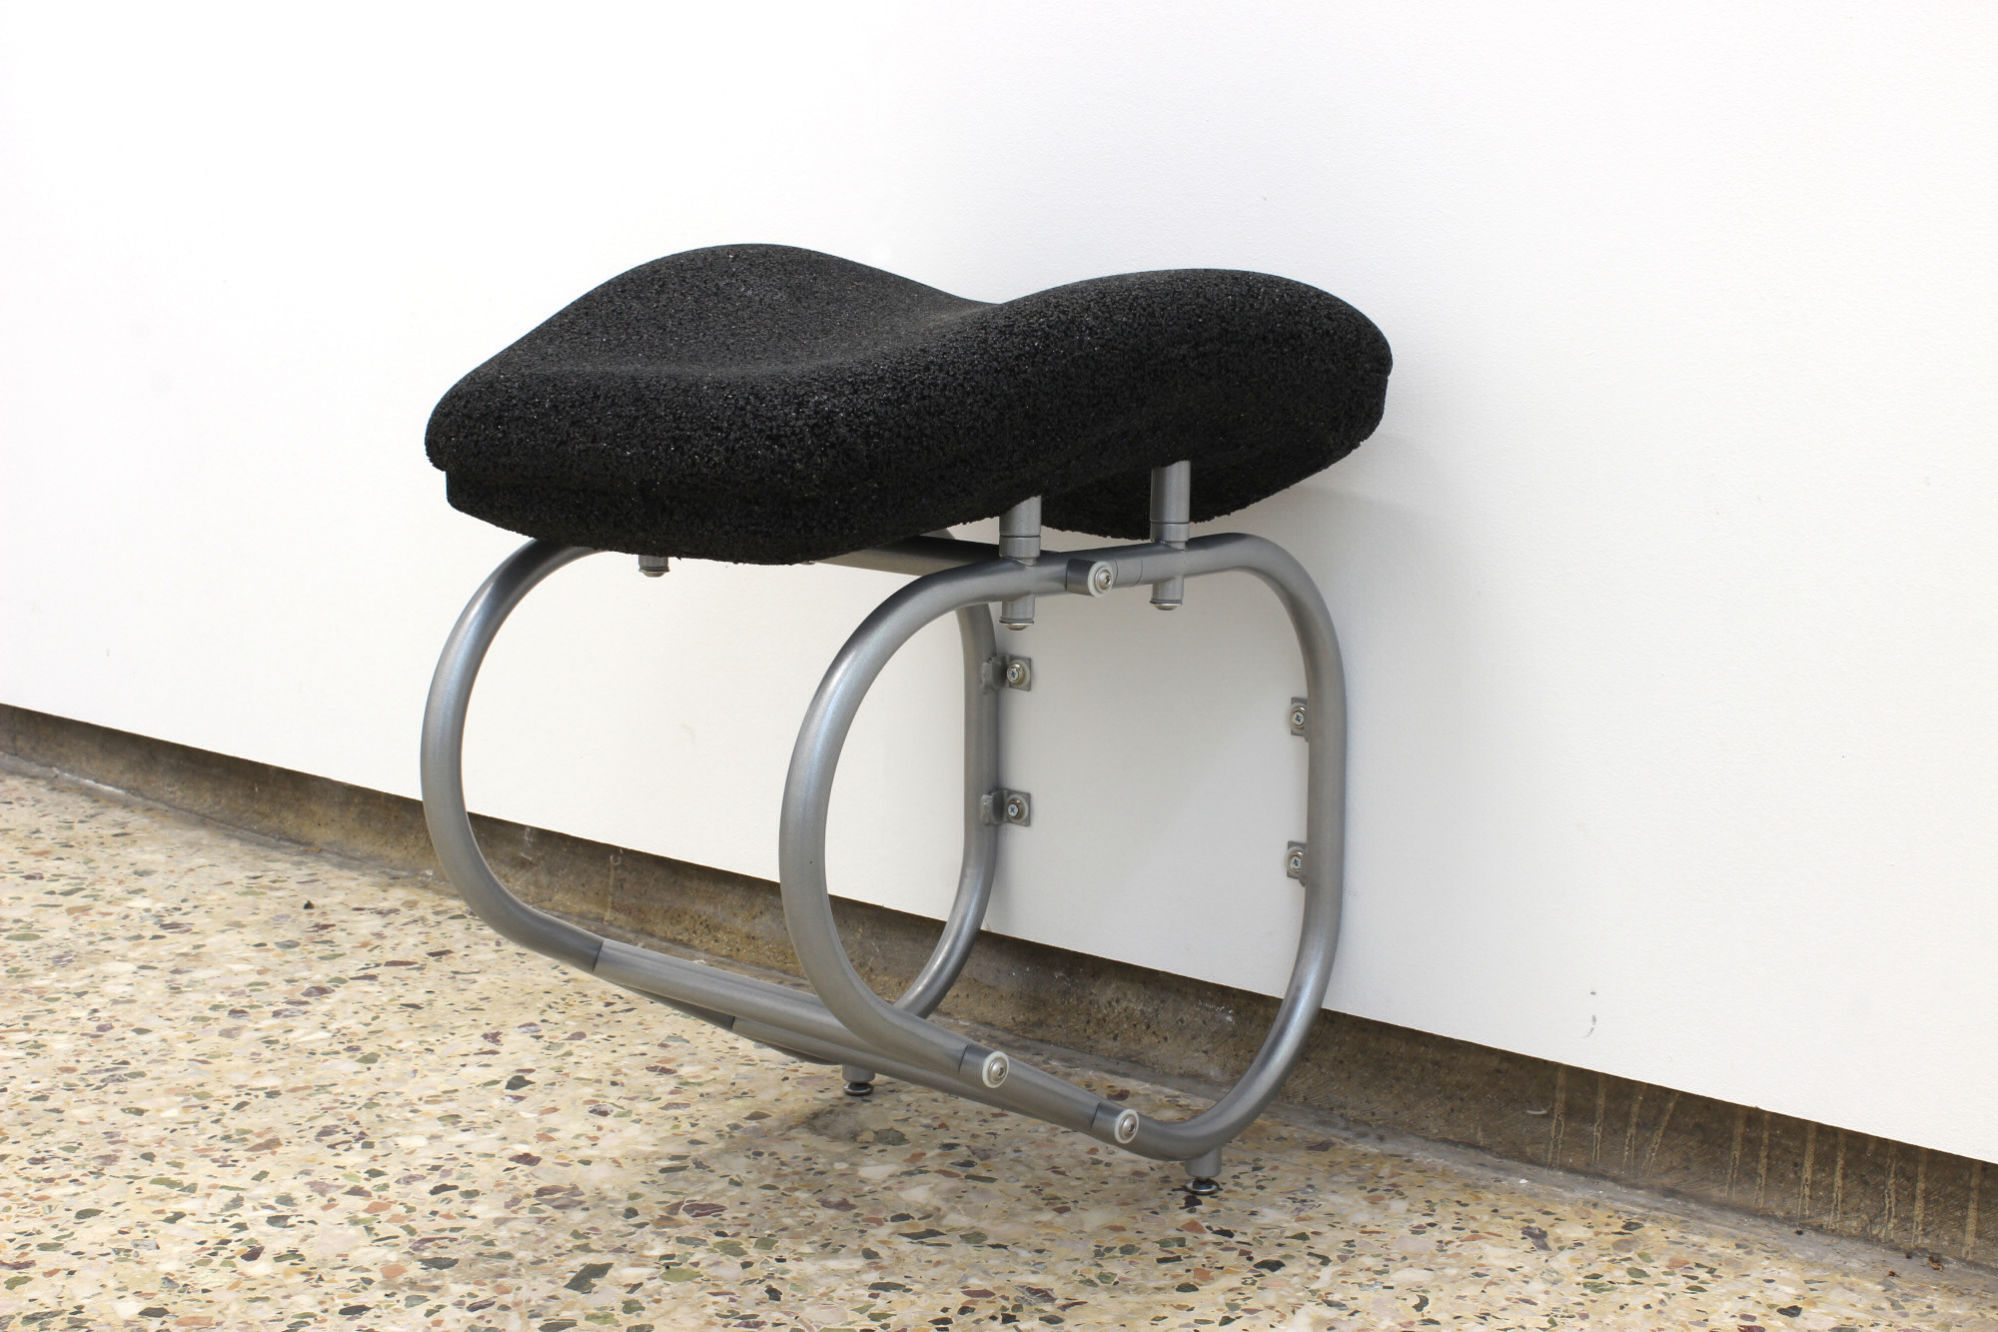 James Fuller - Wall Seat, 2020 - Tyre Chippings, Powder Coated Steel, Reinforced Plaster Polymer - 03